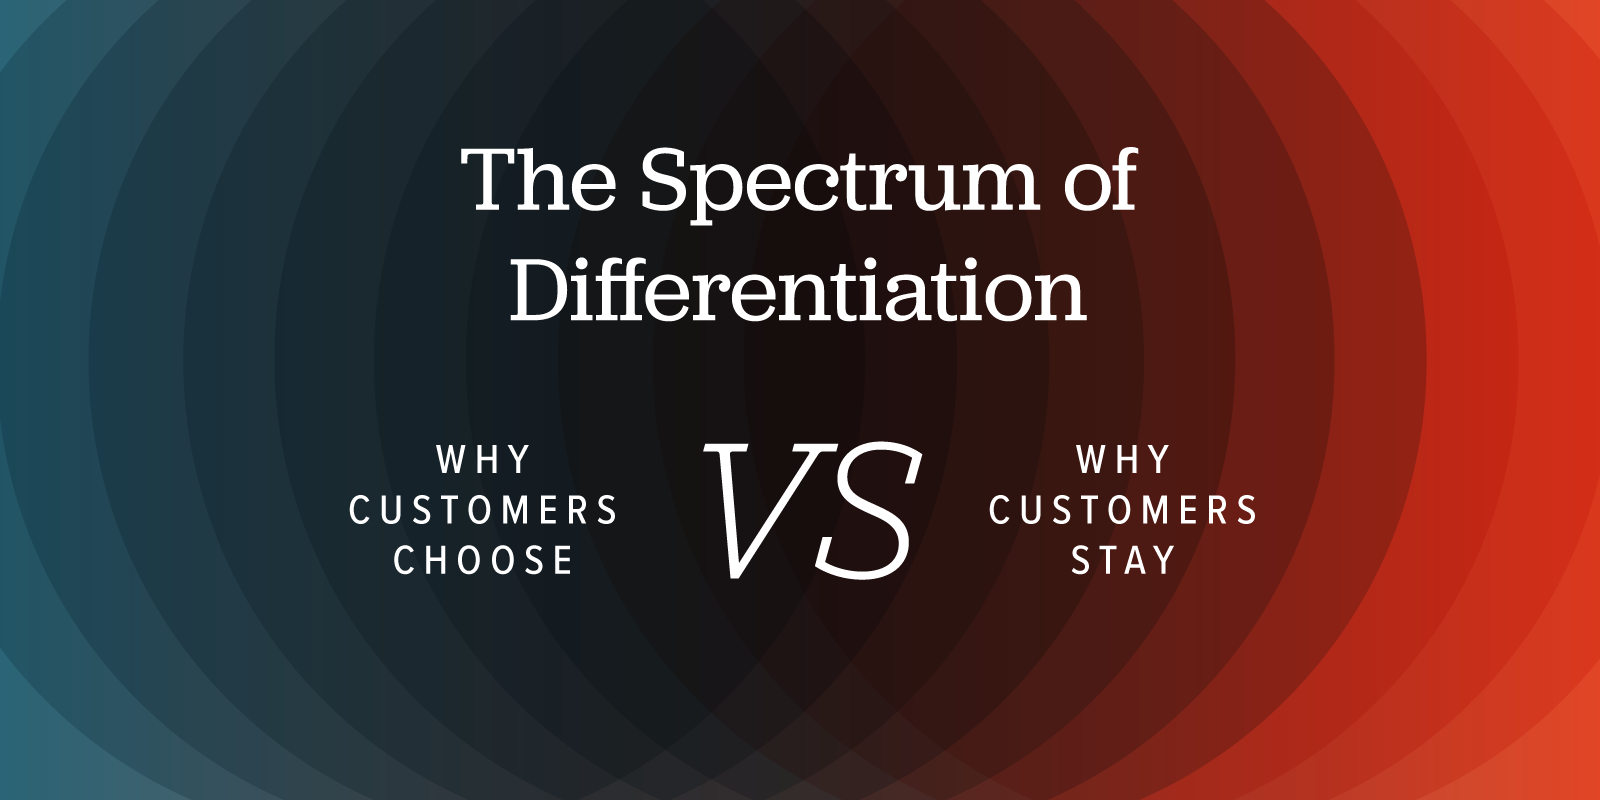 The Spectrum of Differentiation: Why customers choose versus why customers stay